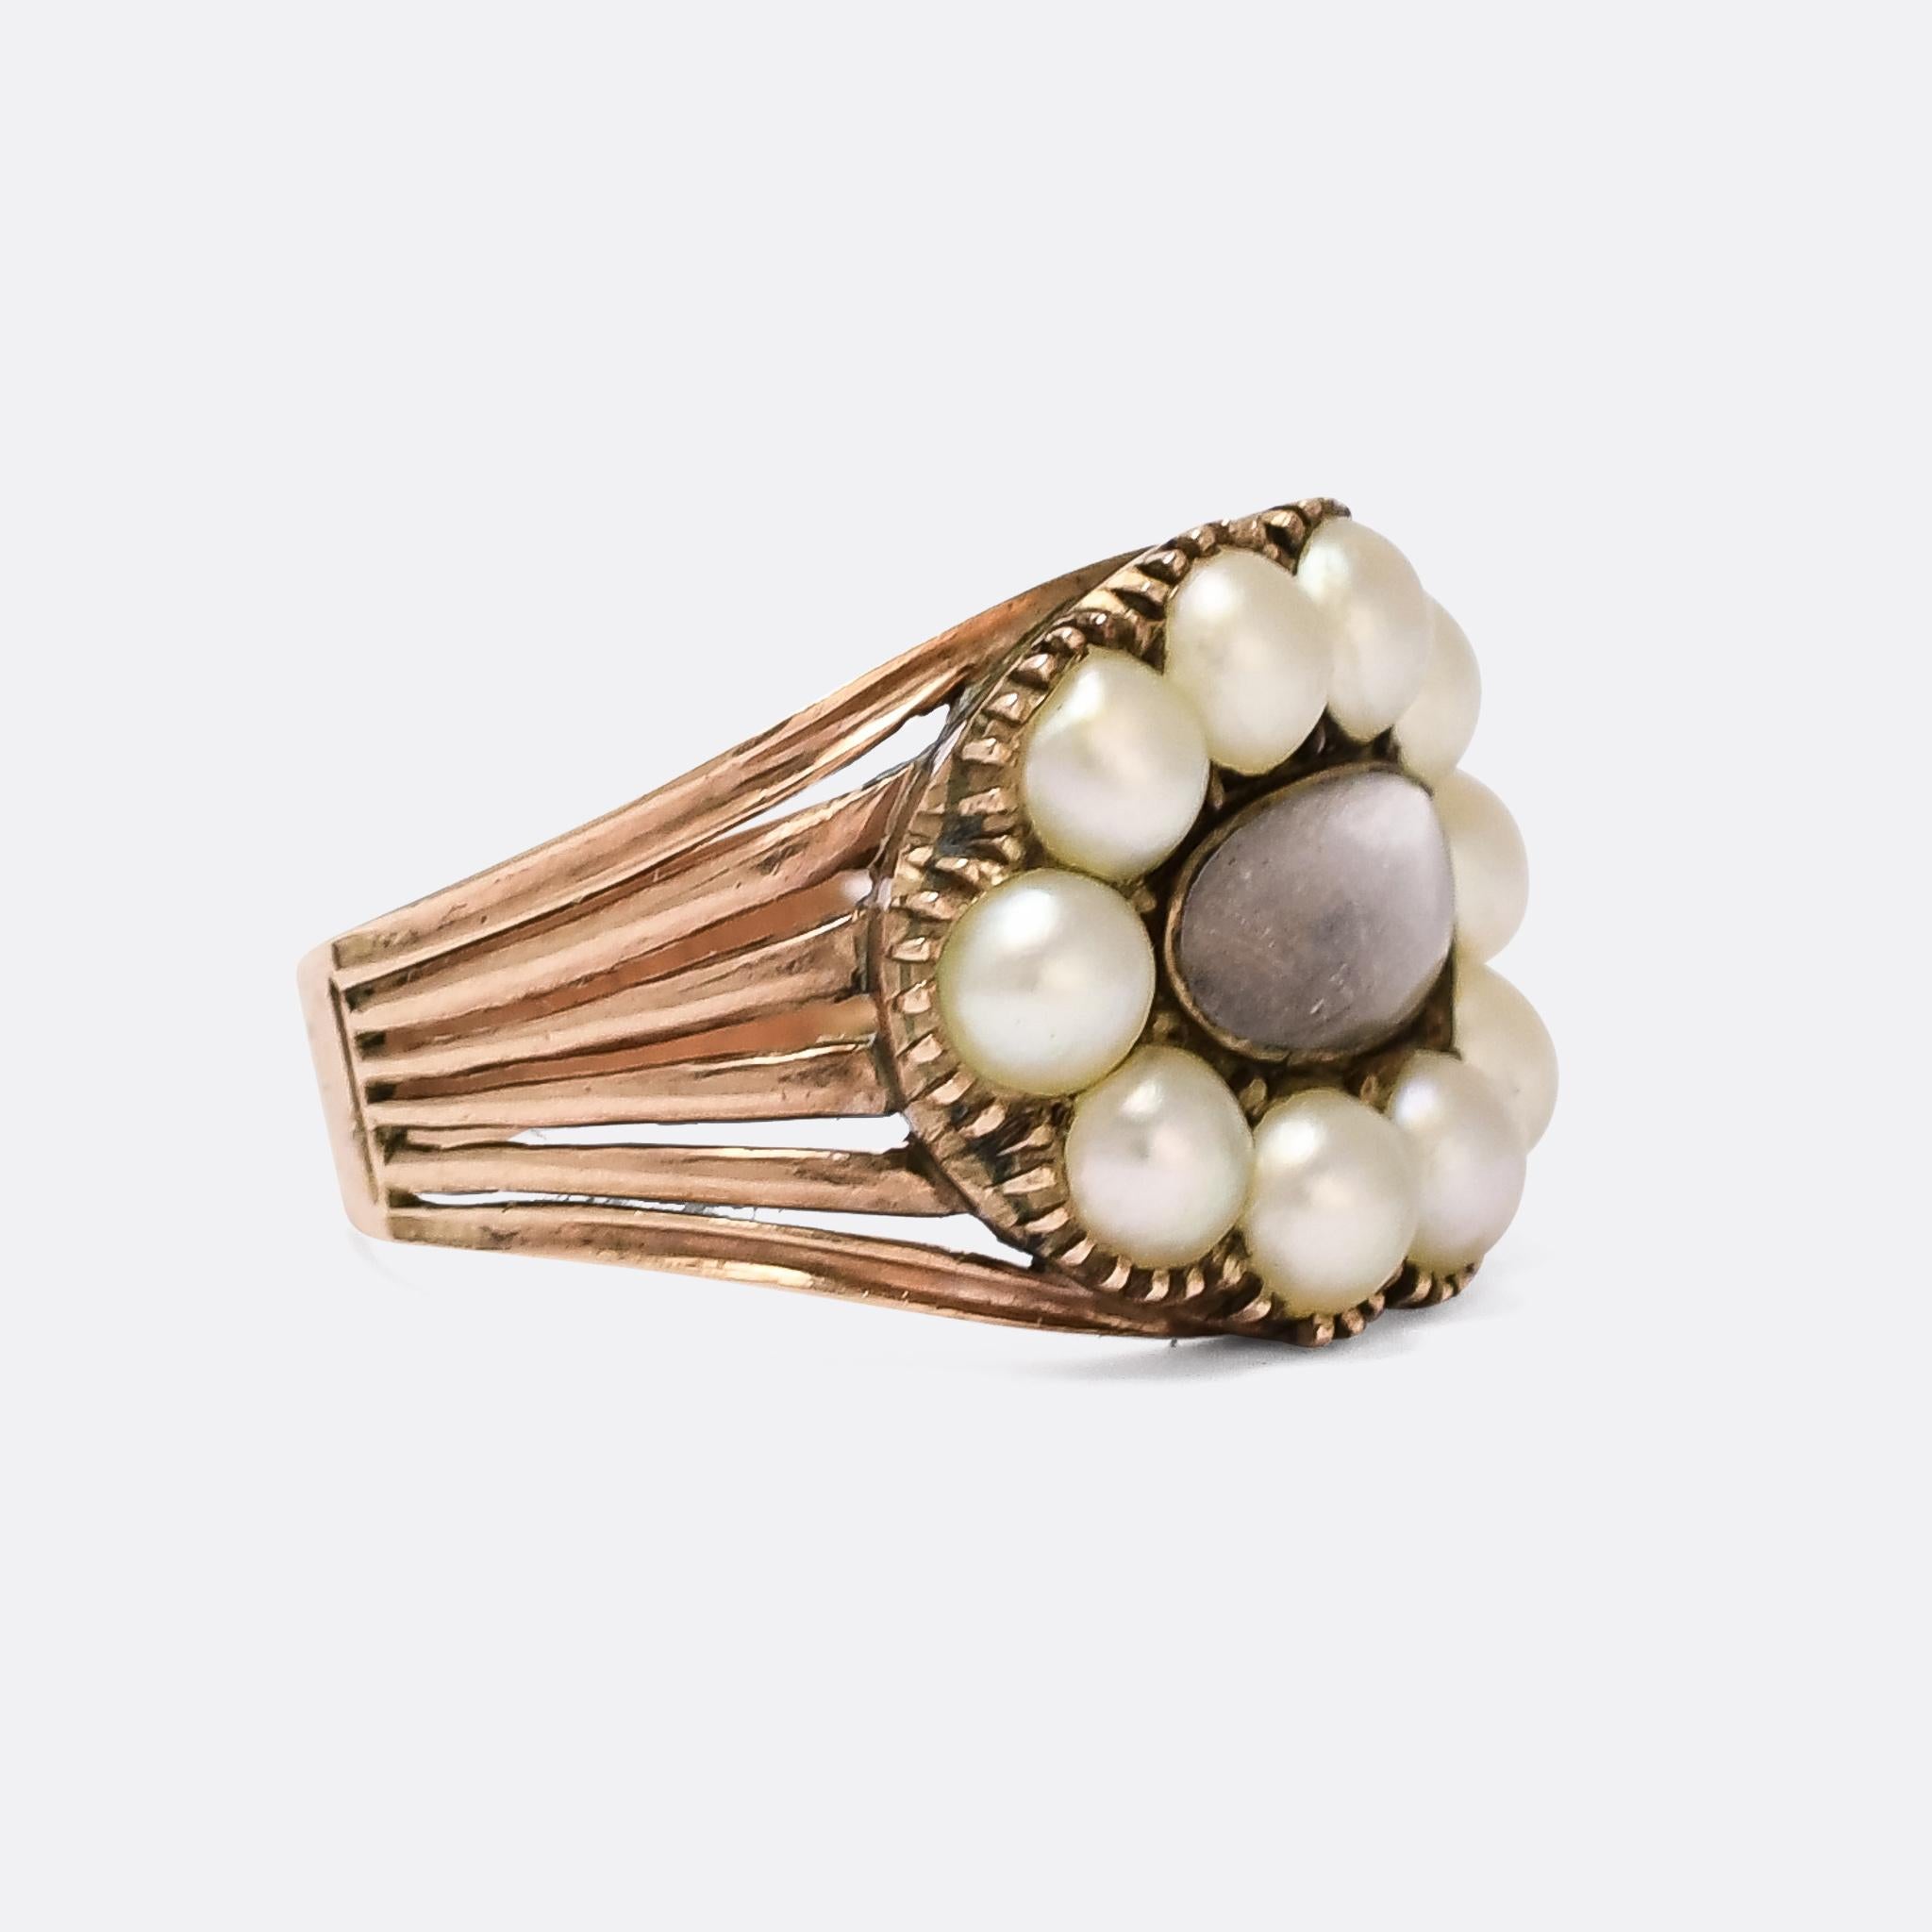 A gorgeous Georgian memorial ring dating from the early 19th Century, circa 1820. It features a finely woven locket of hair behind an oval glass compartment, within a border of natural pearls in crimped settings. The shoulders split into six